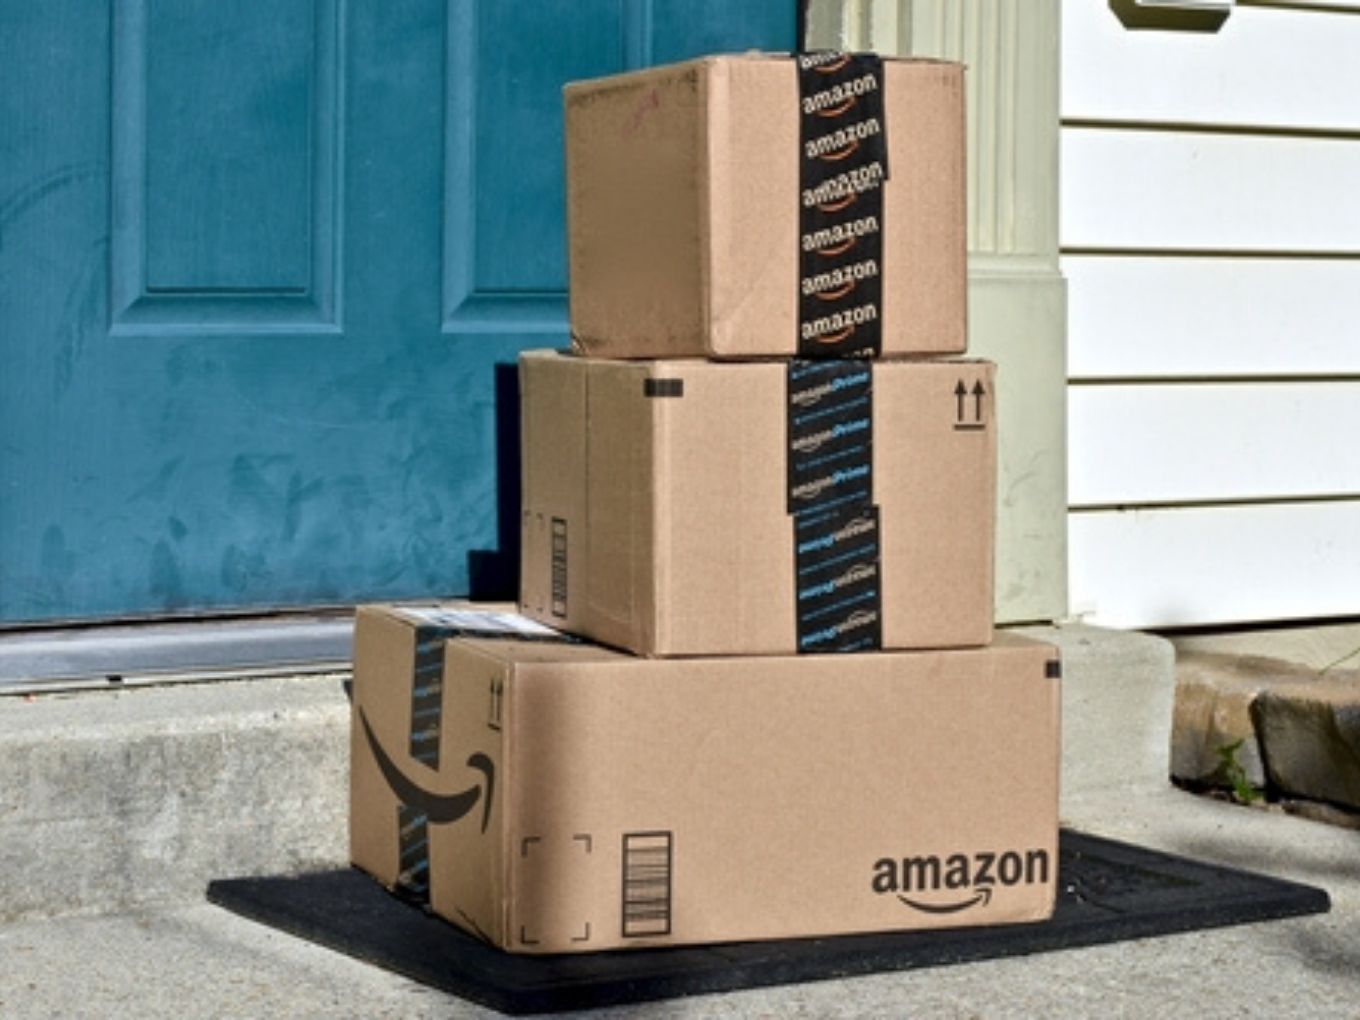 Amazon Prime Deliveries Now Available Pan-India With Latest Expansion